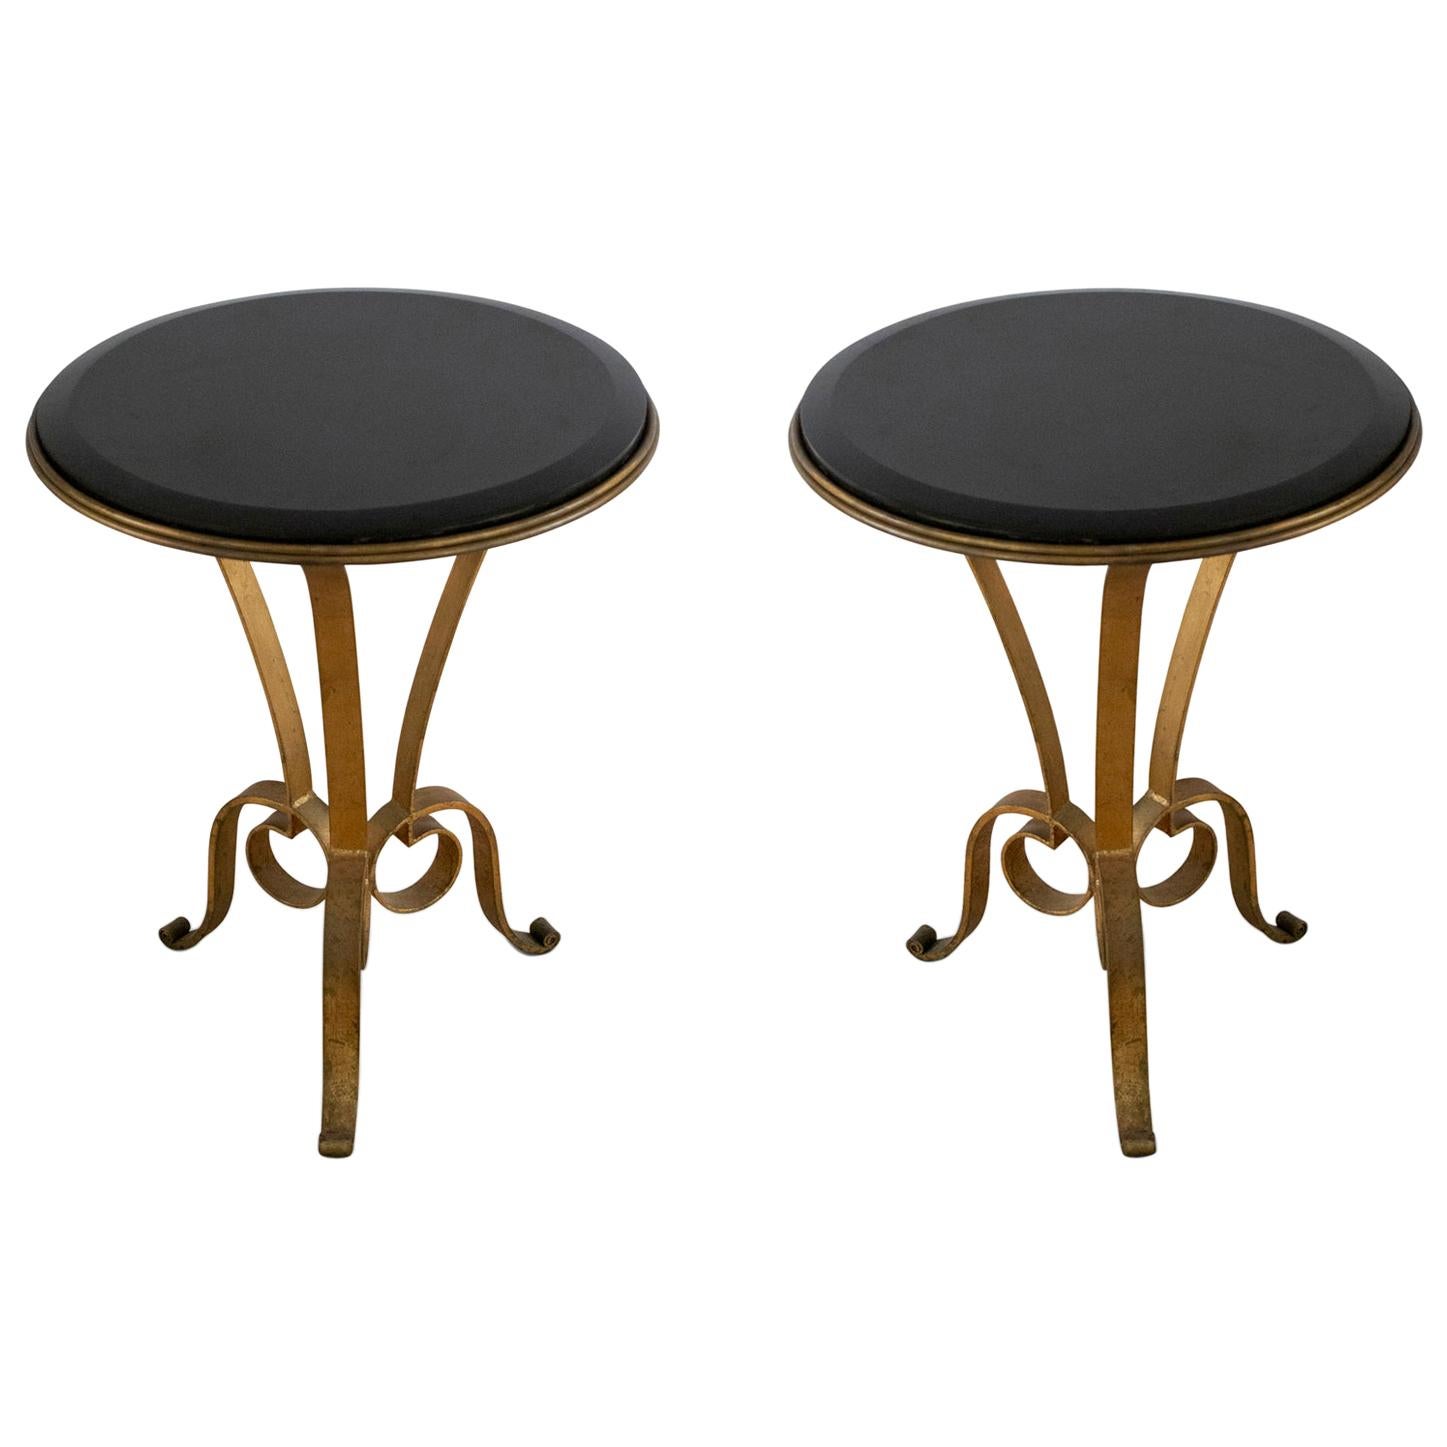 Pair of French Art Deco Style Gilt Metal and Black Marble Circular Tables